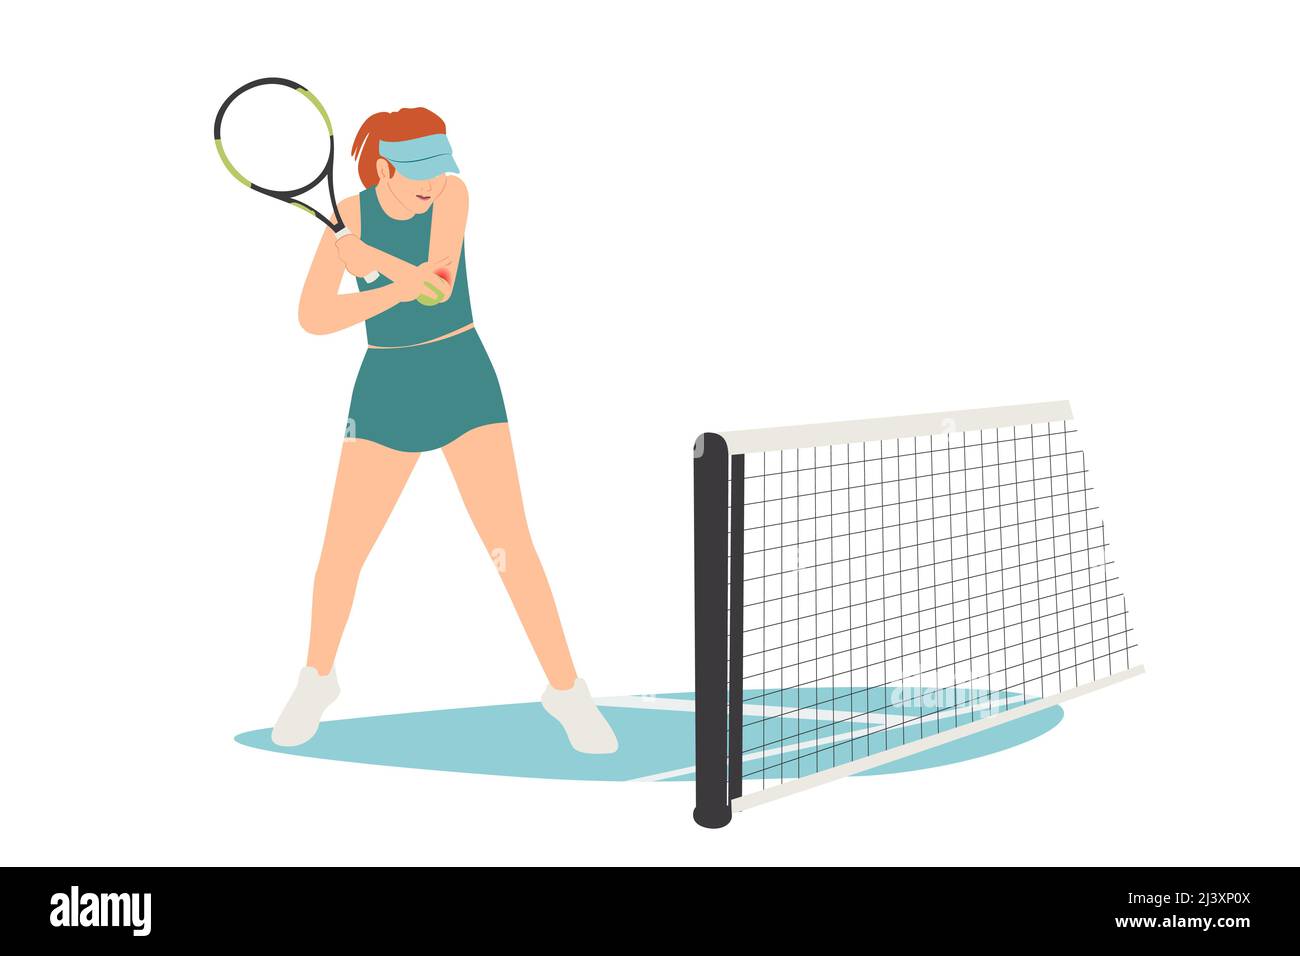 A vector illustration of Injured Tennis Player Sprained Elbow Stock Vector